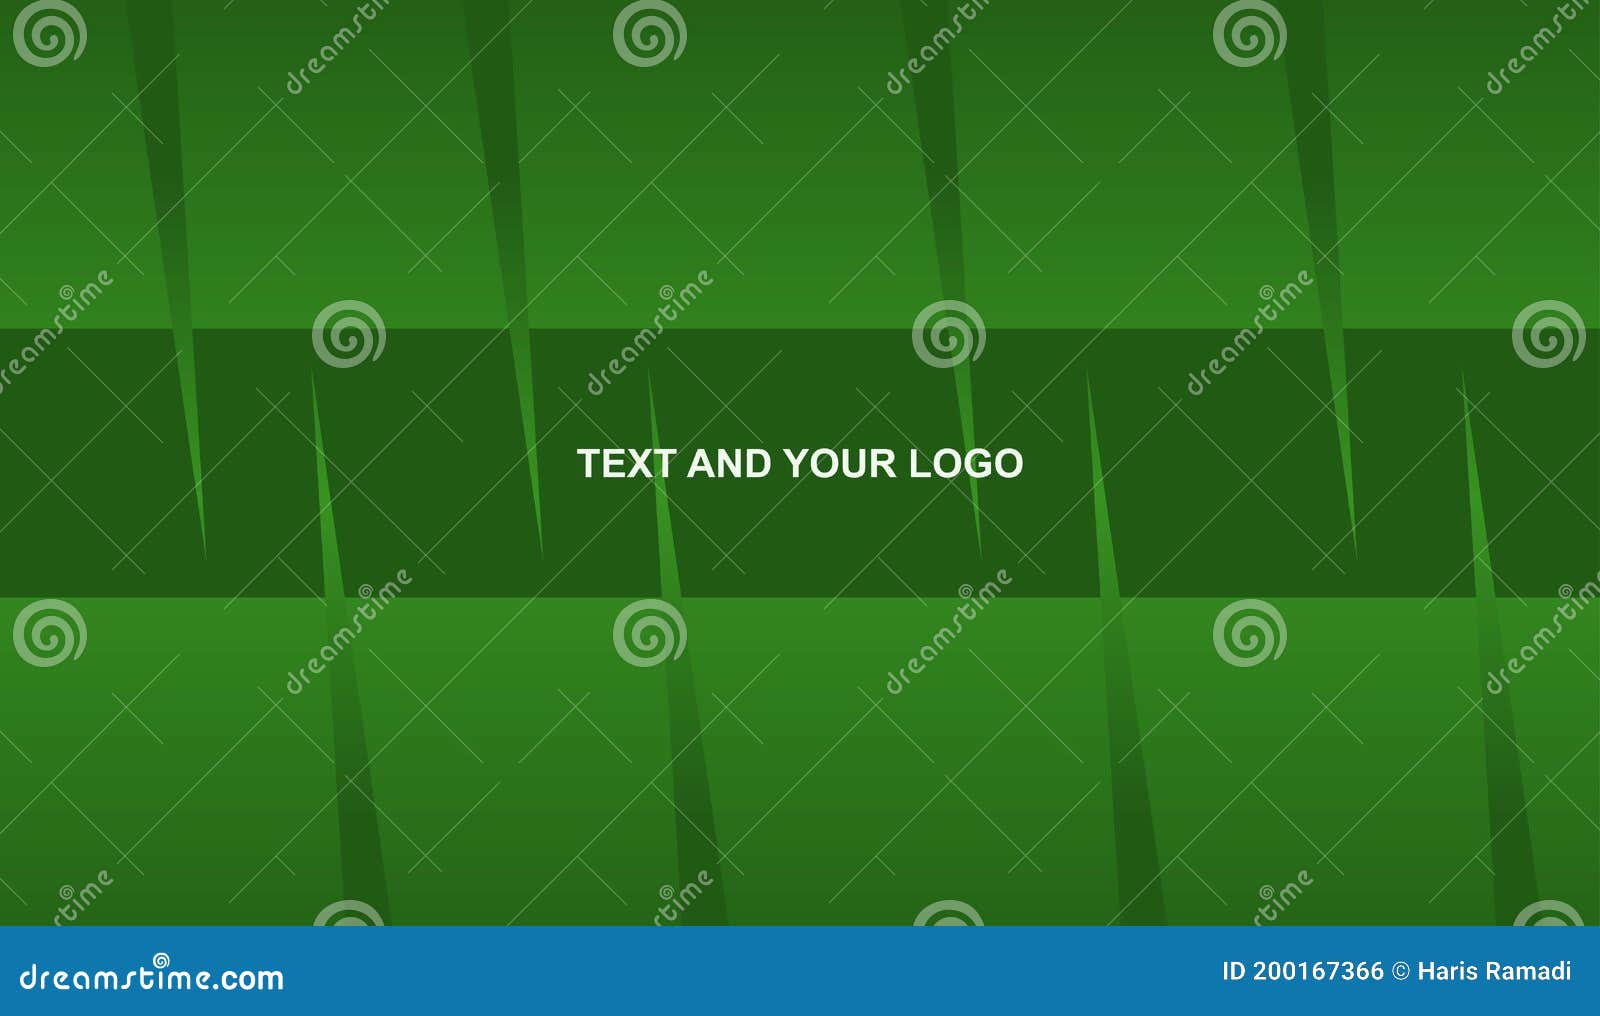 Youtube Channel Banner Template with Lines and Shapes Stock Vector -  Illustration of banner, leaflet: 200167366